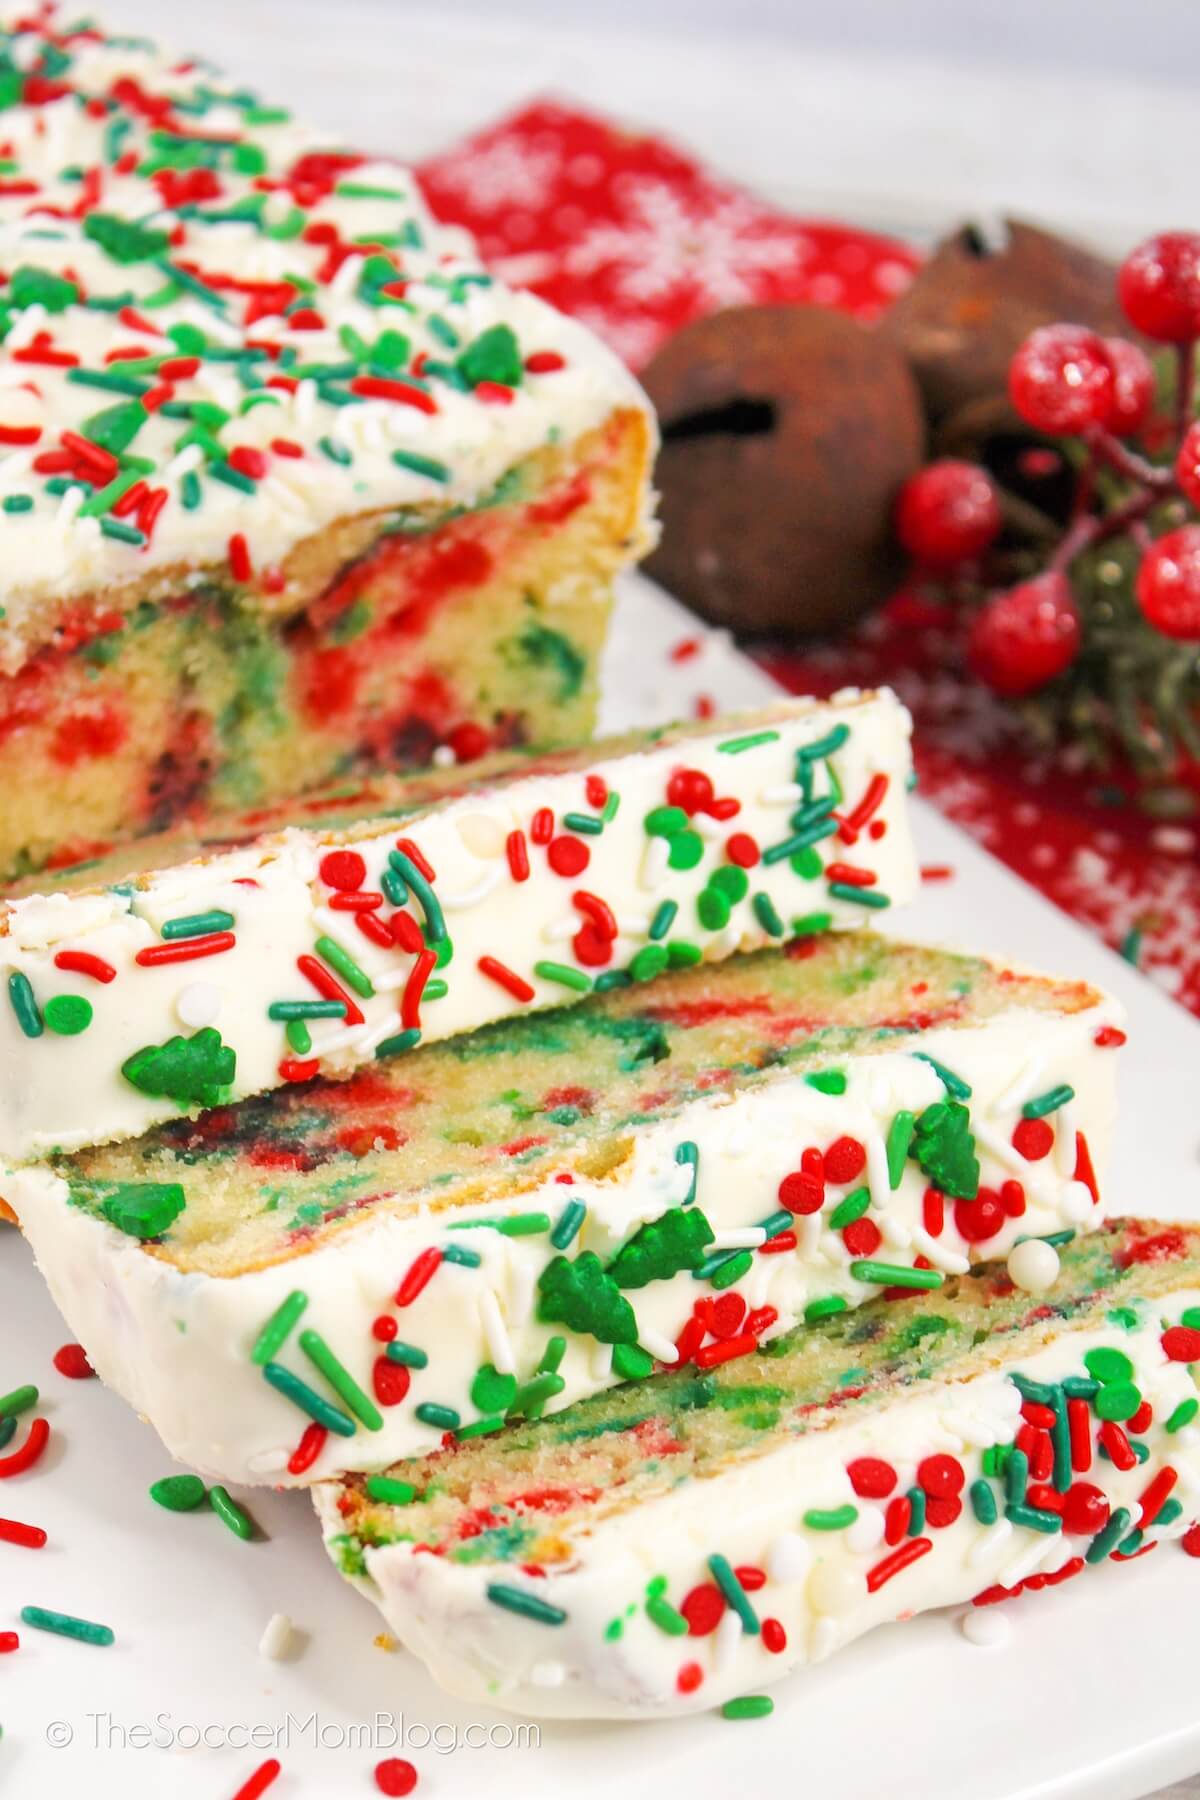 An iced Christmas loaf cake sliced to reveal red and green sprinkles inside